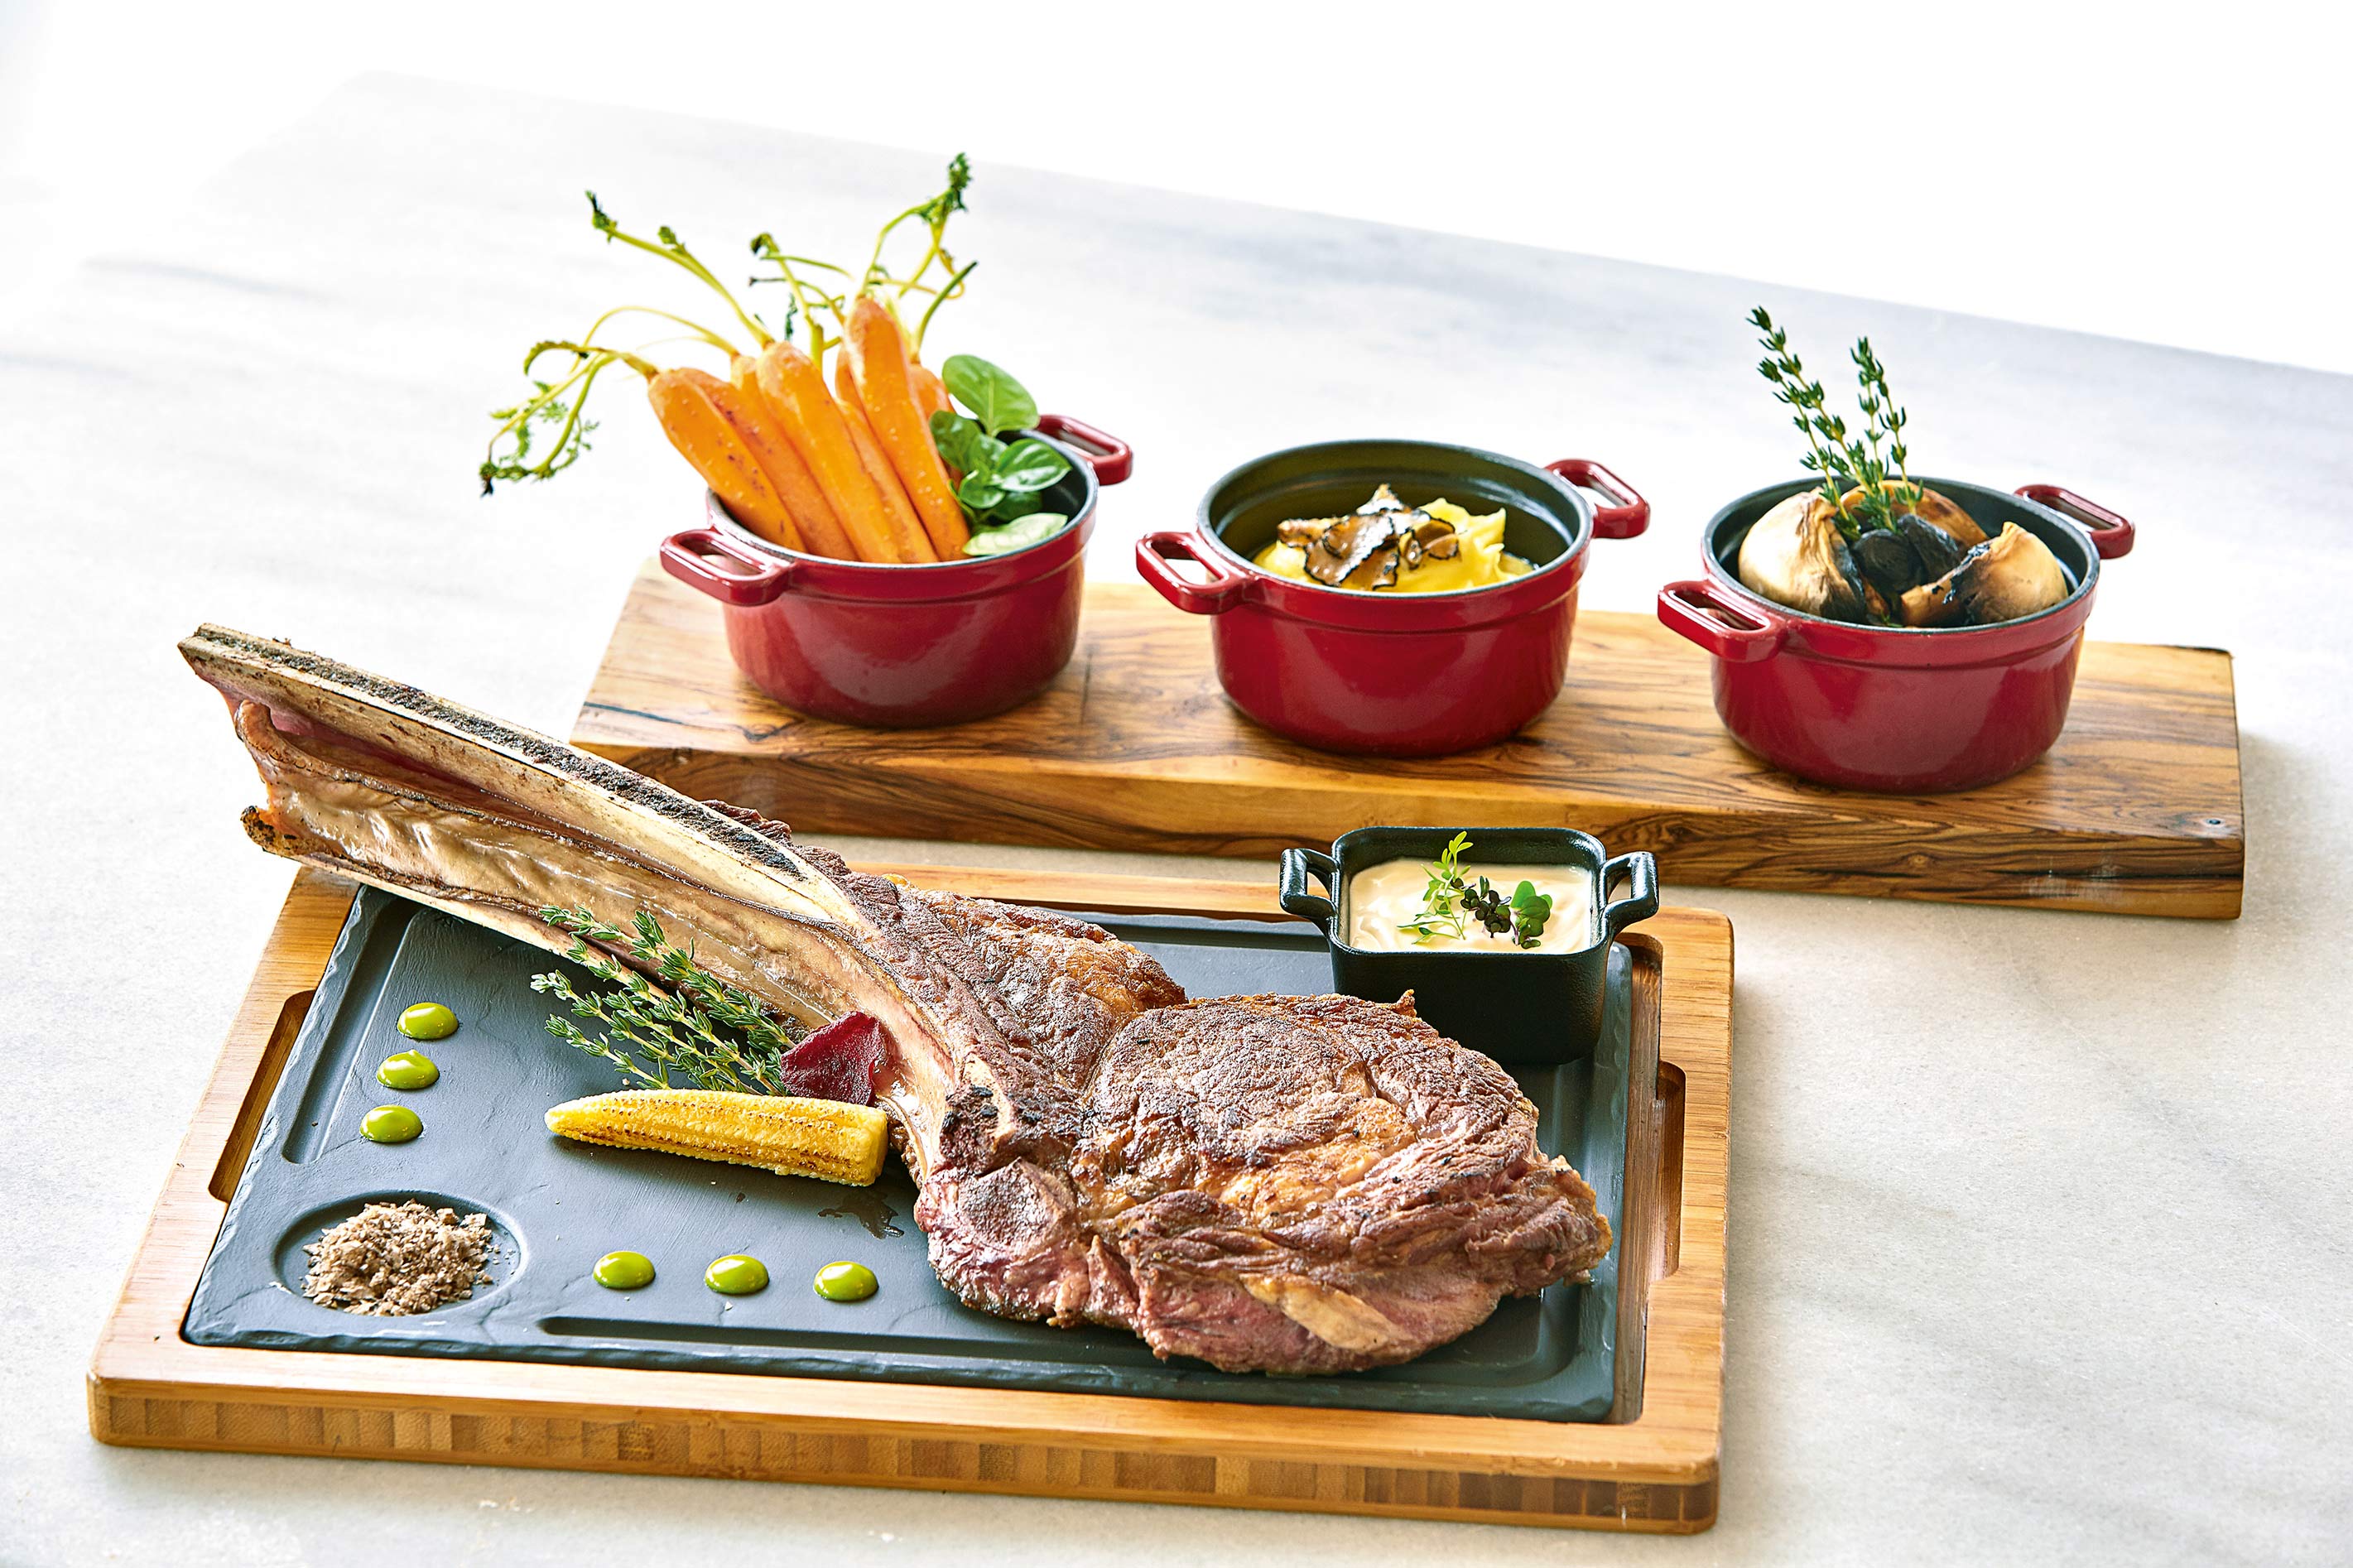 grilled steak on wooden plate, Grecotel, greece